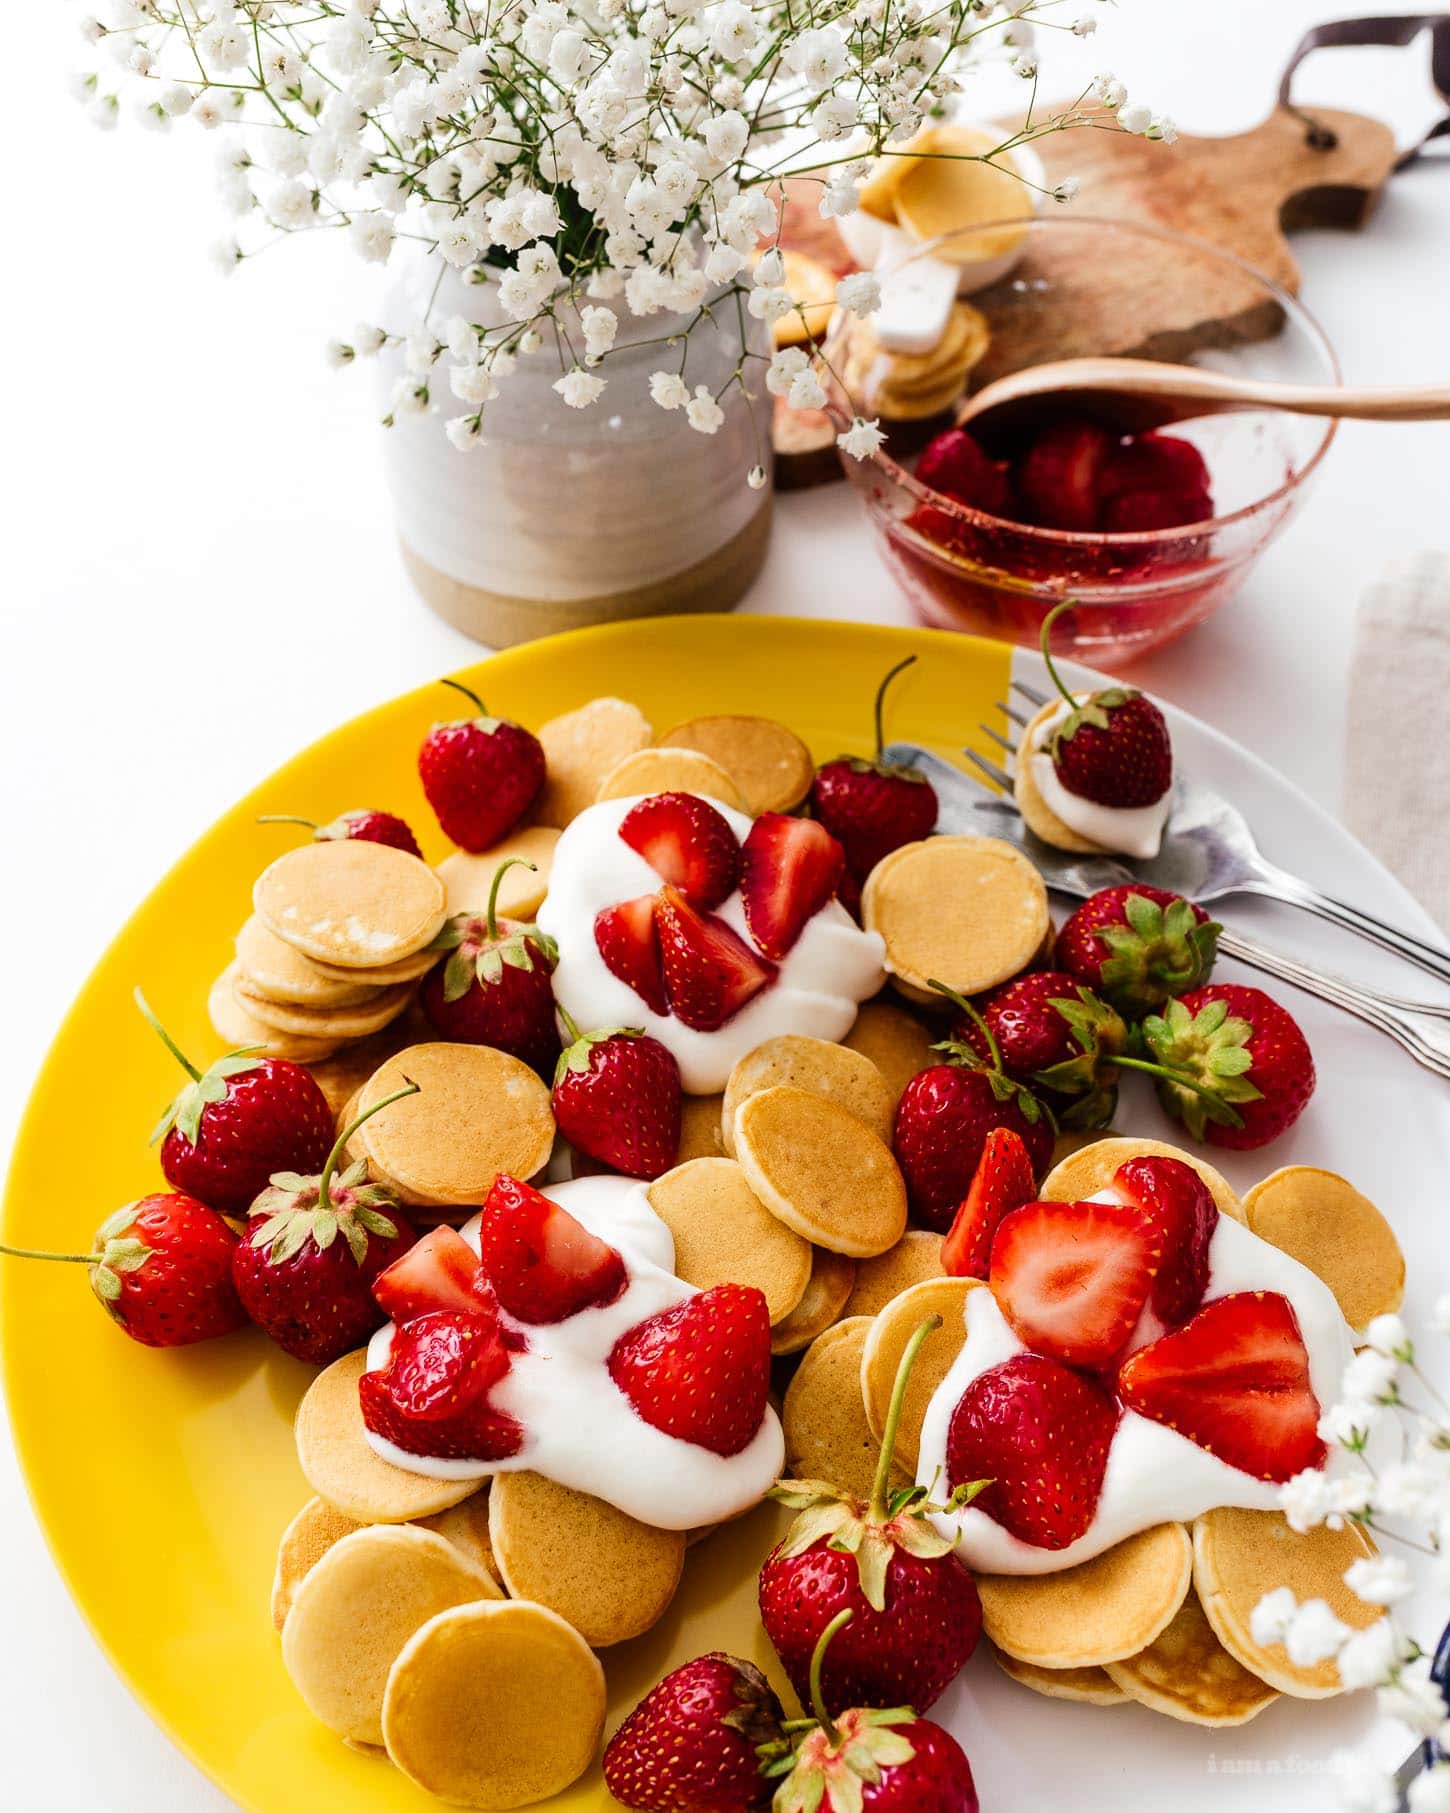 This fluffy mini strawberry shortcake pancake recipe is perfect for summer. Super cute mini silver dollar vanilla pancakes topped with juicy strawberries and softly whipped cream. Like a strawberry shortcake for breakfast! #strawberries #strawberry #strawberrypancakes #strawberrypancake #strawberryshortcake #strawberryshortcakes